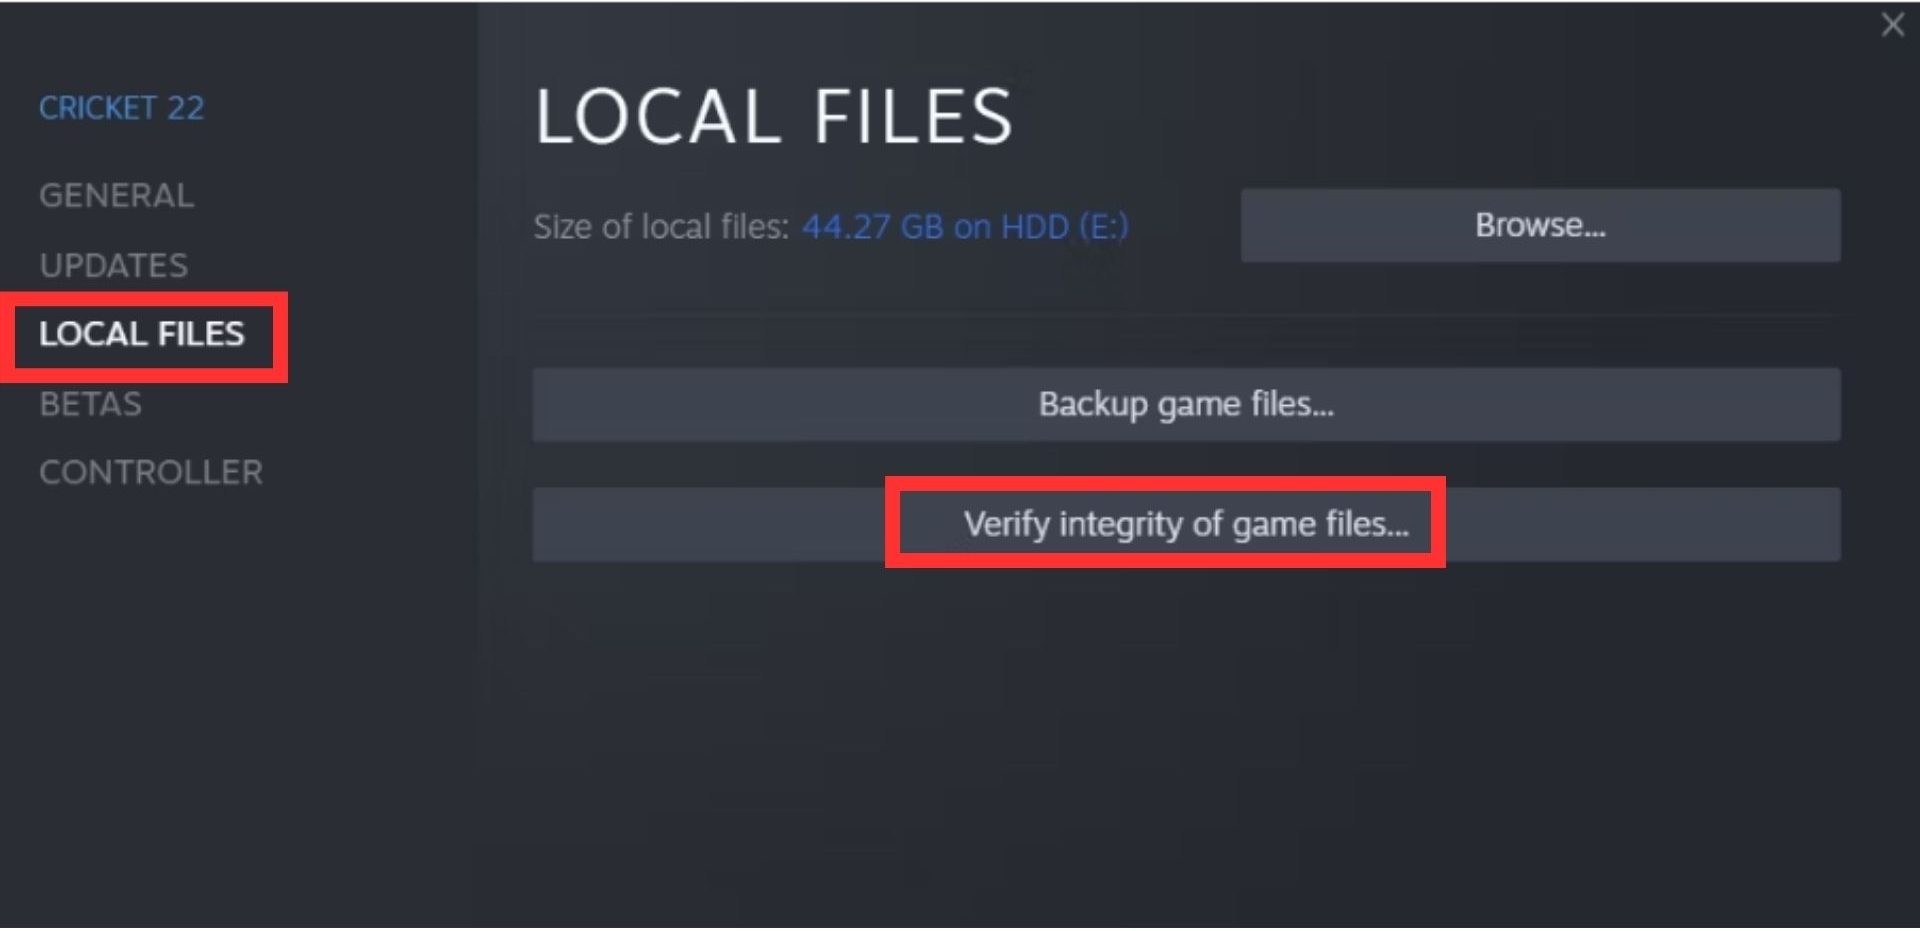 Local Files: Verify Integrity of game files